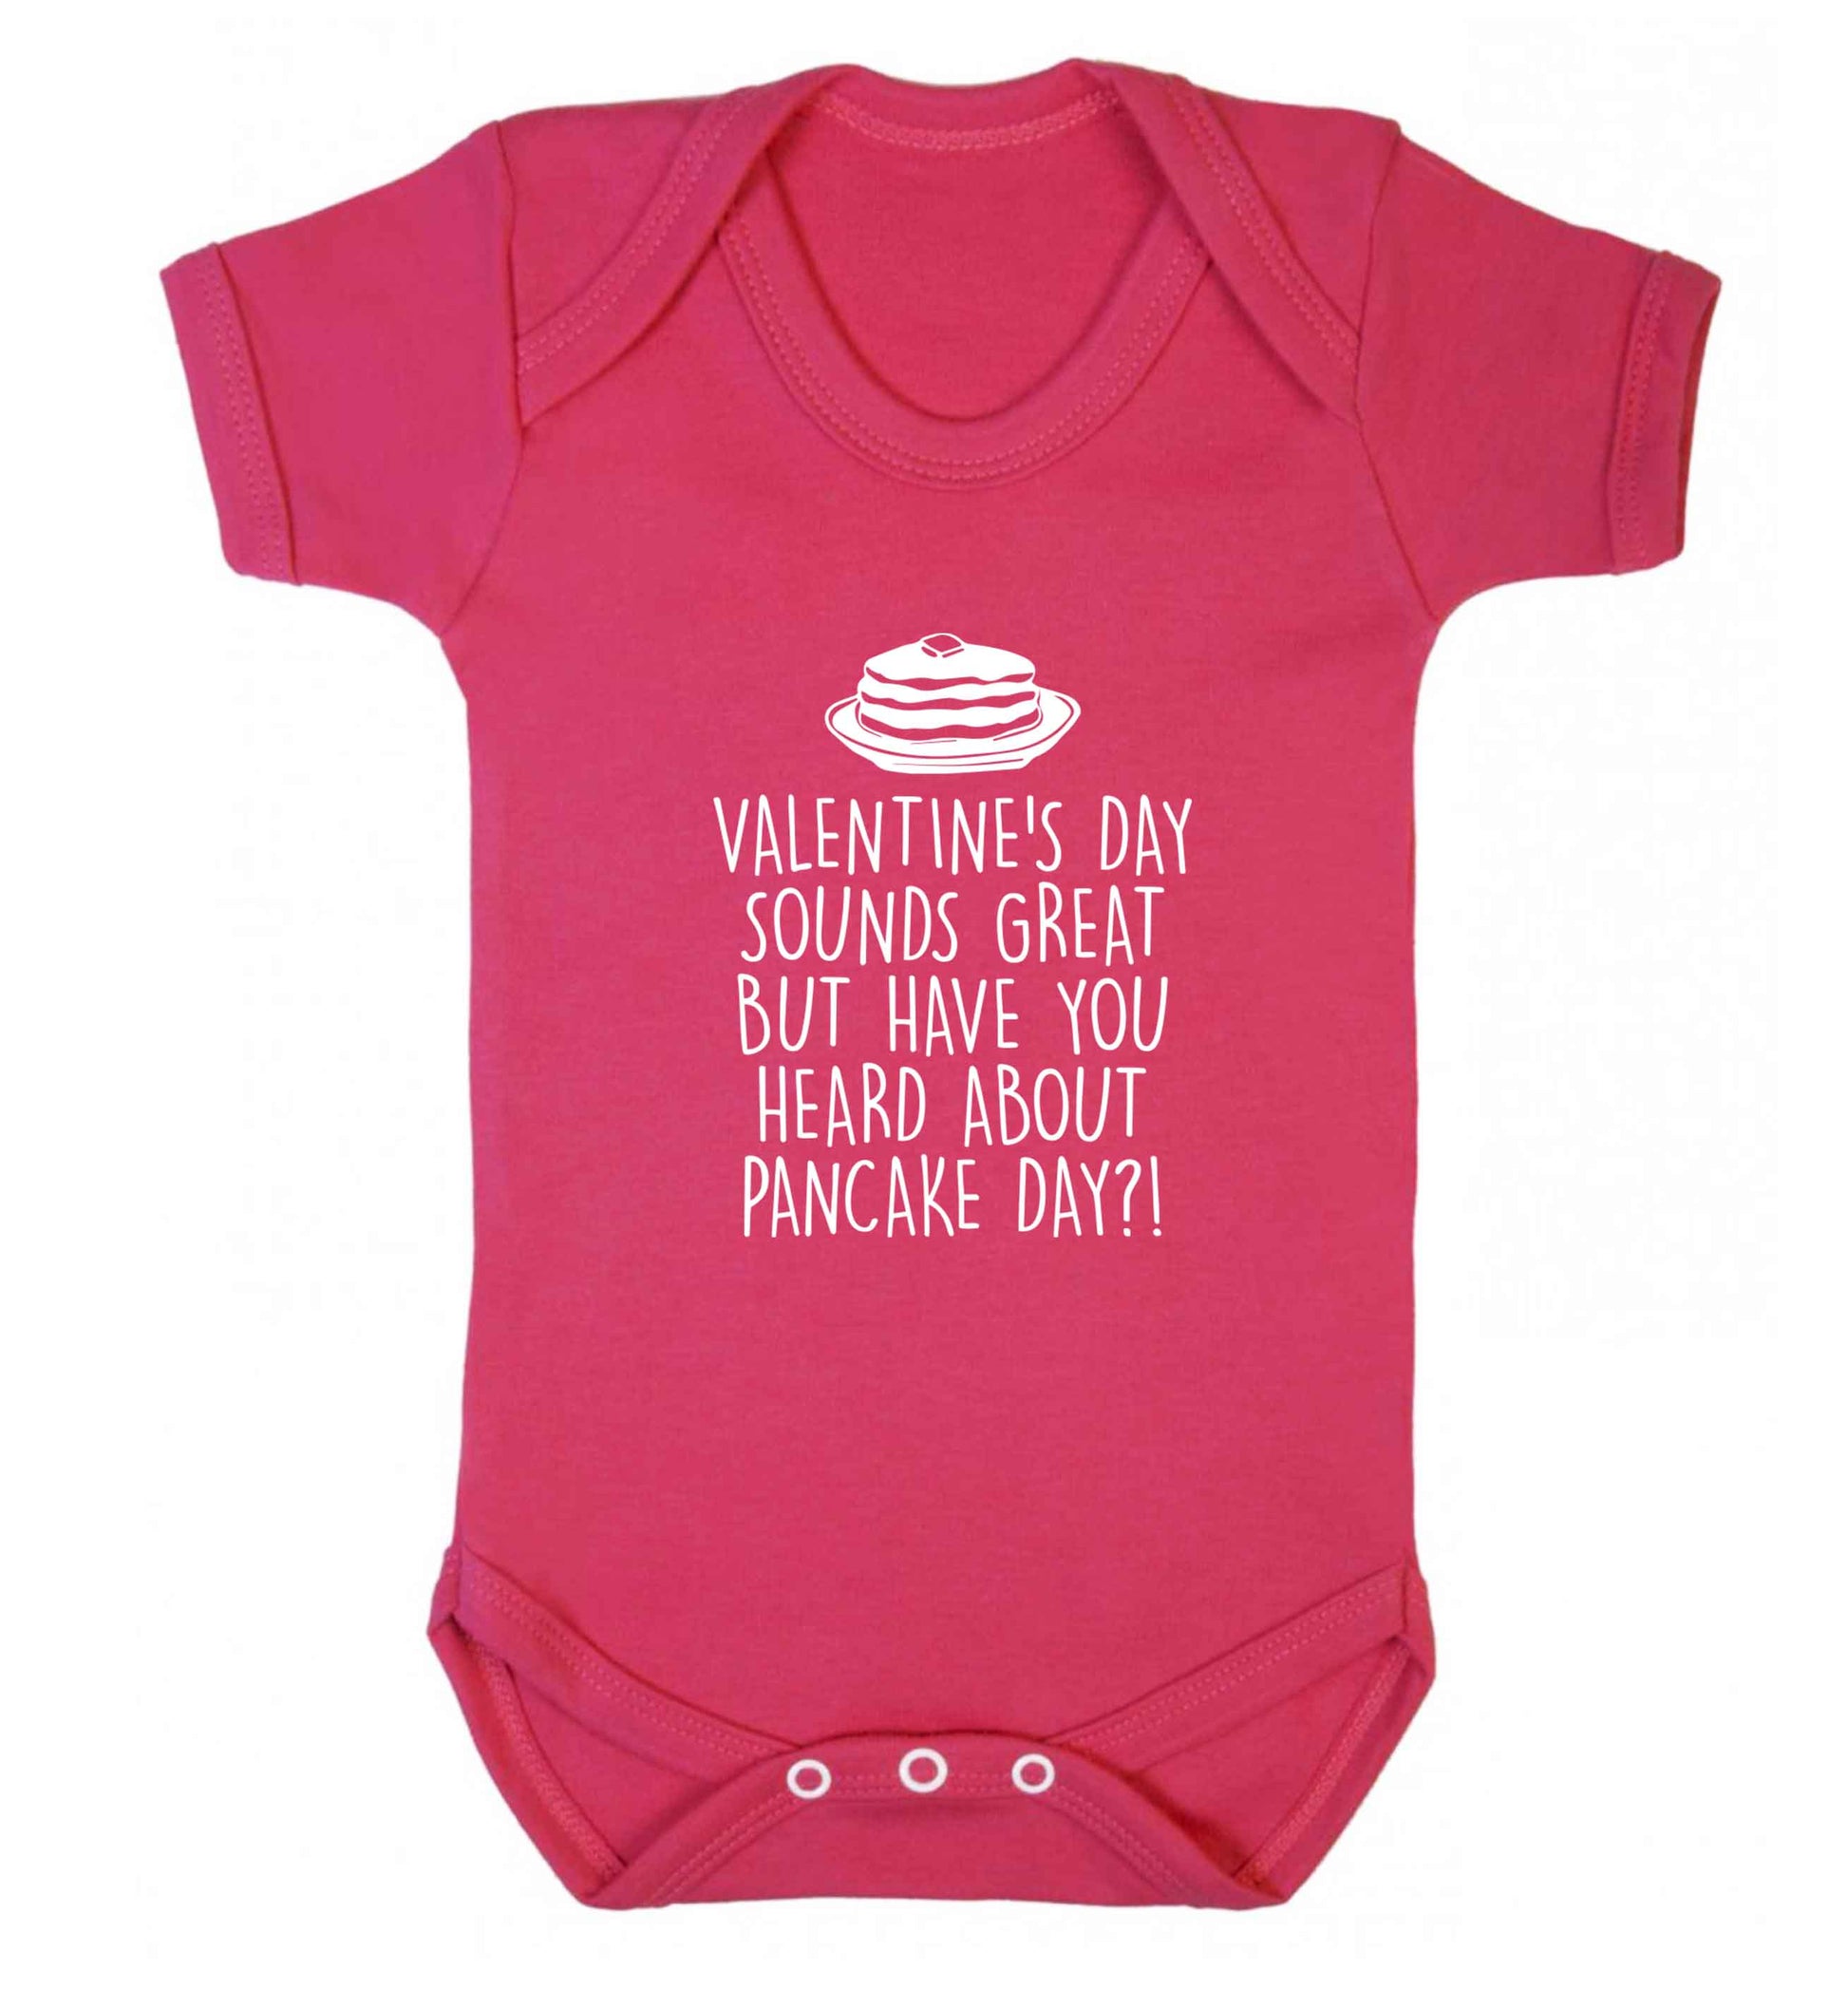 Valentine's day sounds great but have you heard about pancake day?! baby vest dark pink 18-24 months